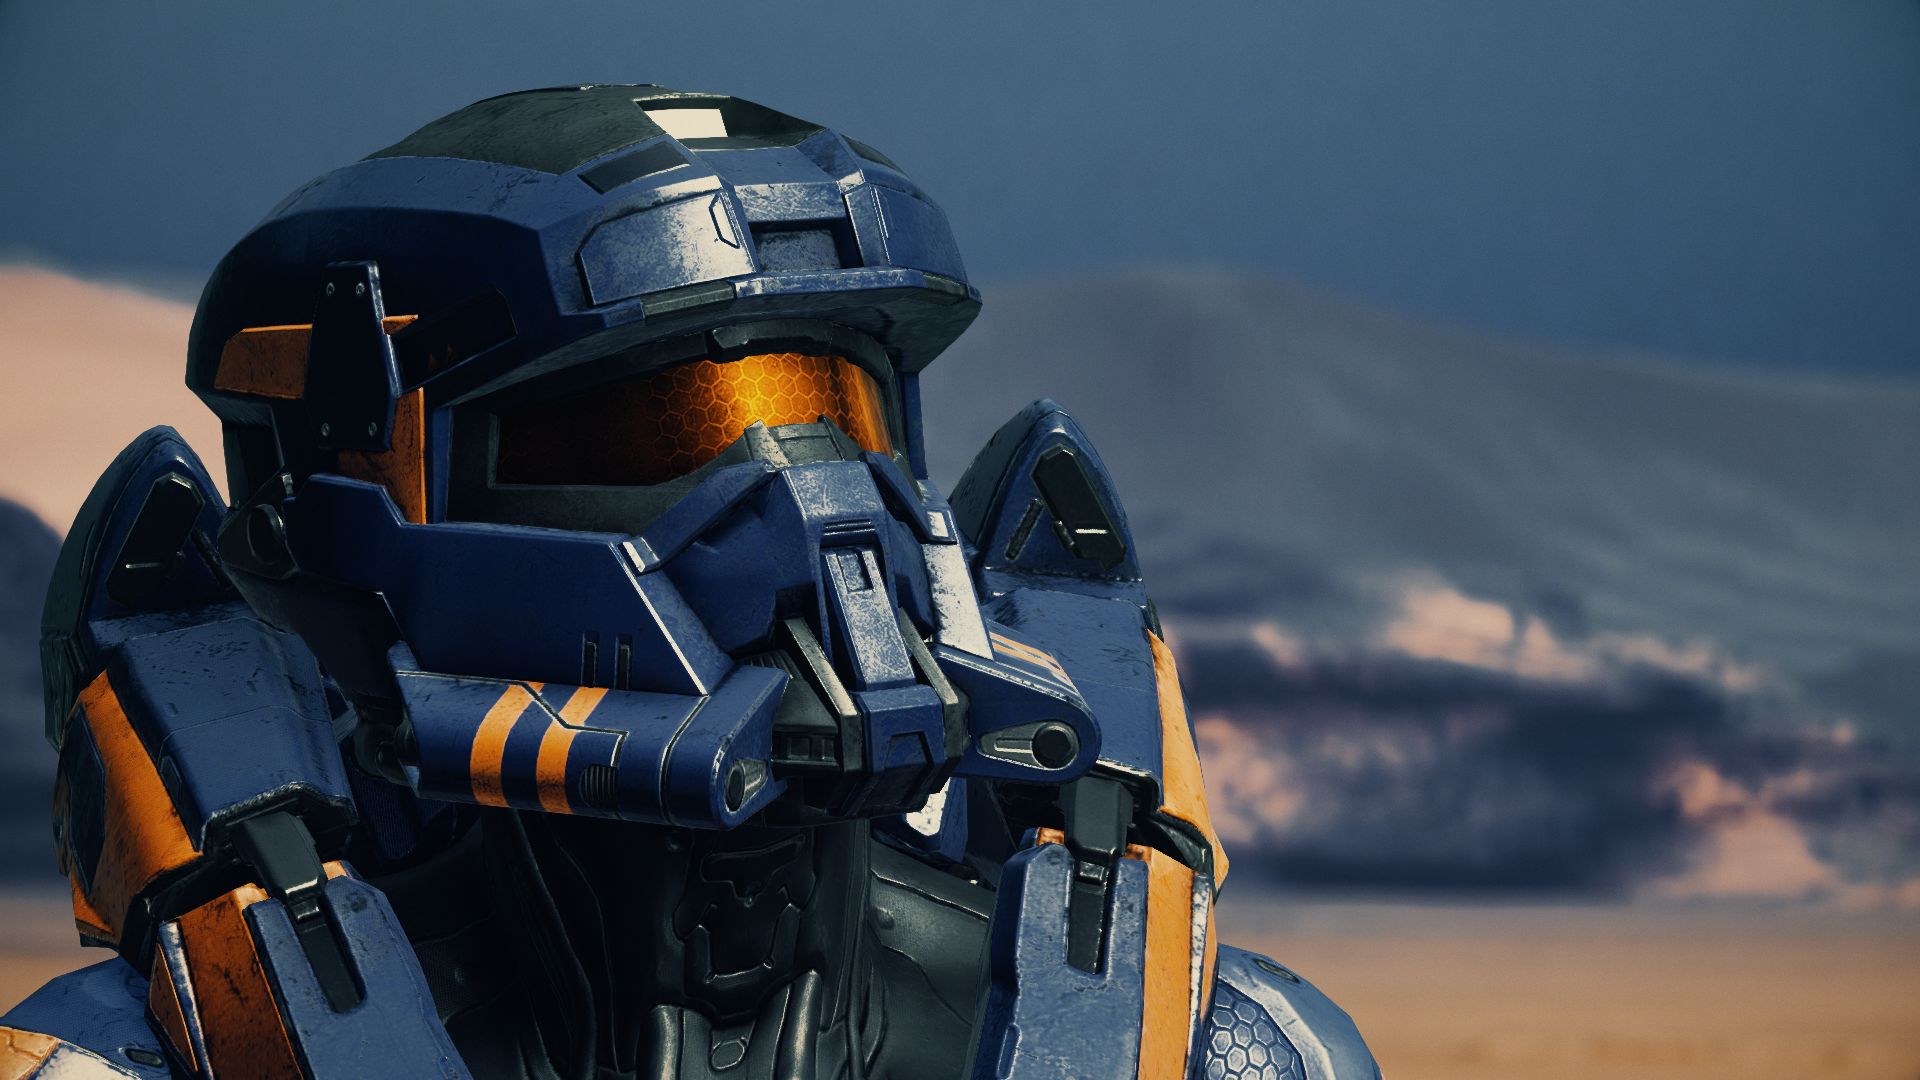 Video Game Halo 5 Guardians 1920x1080